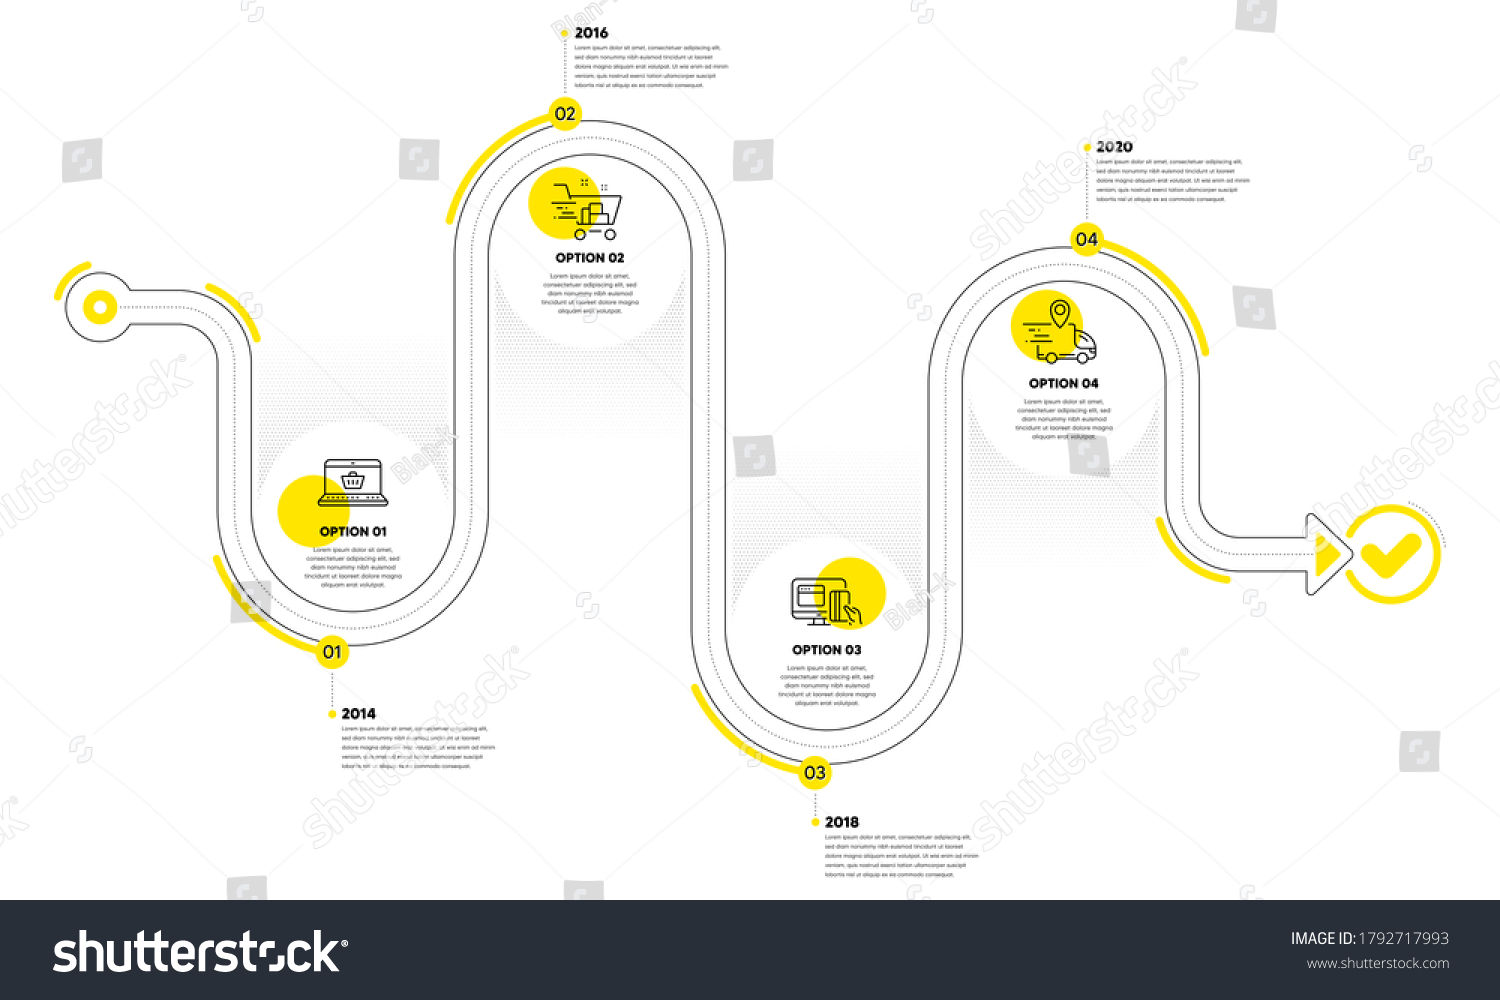 SVG of Infographic timeline with icons and 4 steps. Buying process with numbers. Infographics business concept. Online buying plan, presentation timeline, arrow path. Business journey process. Vector svg